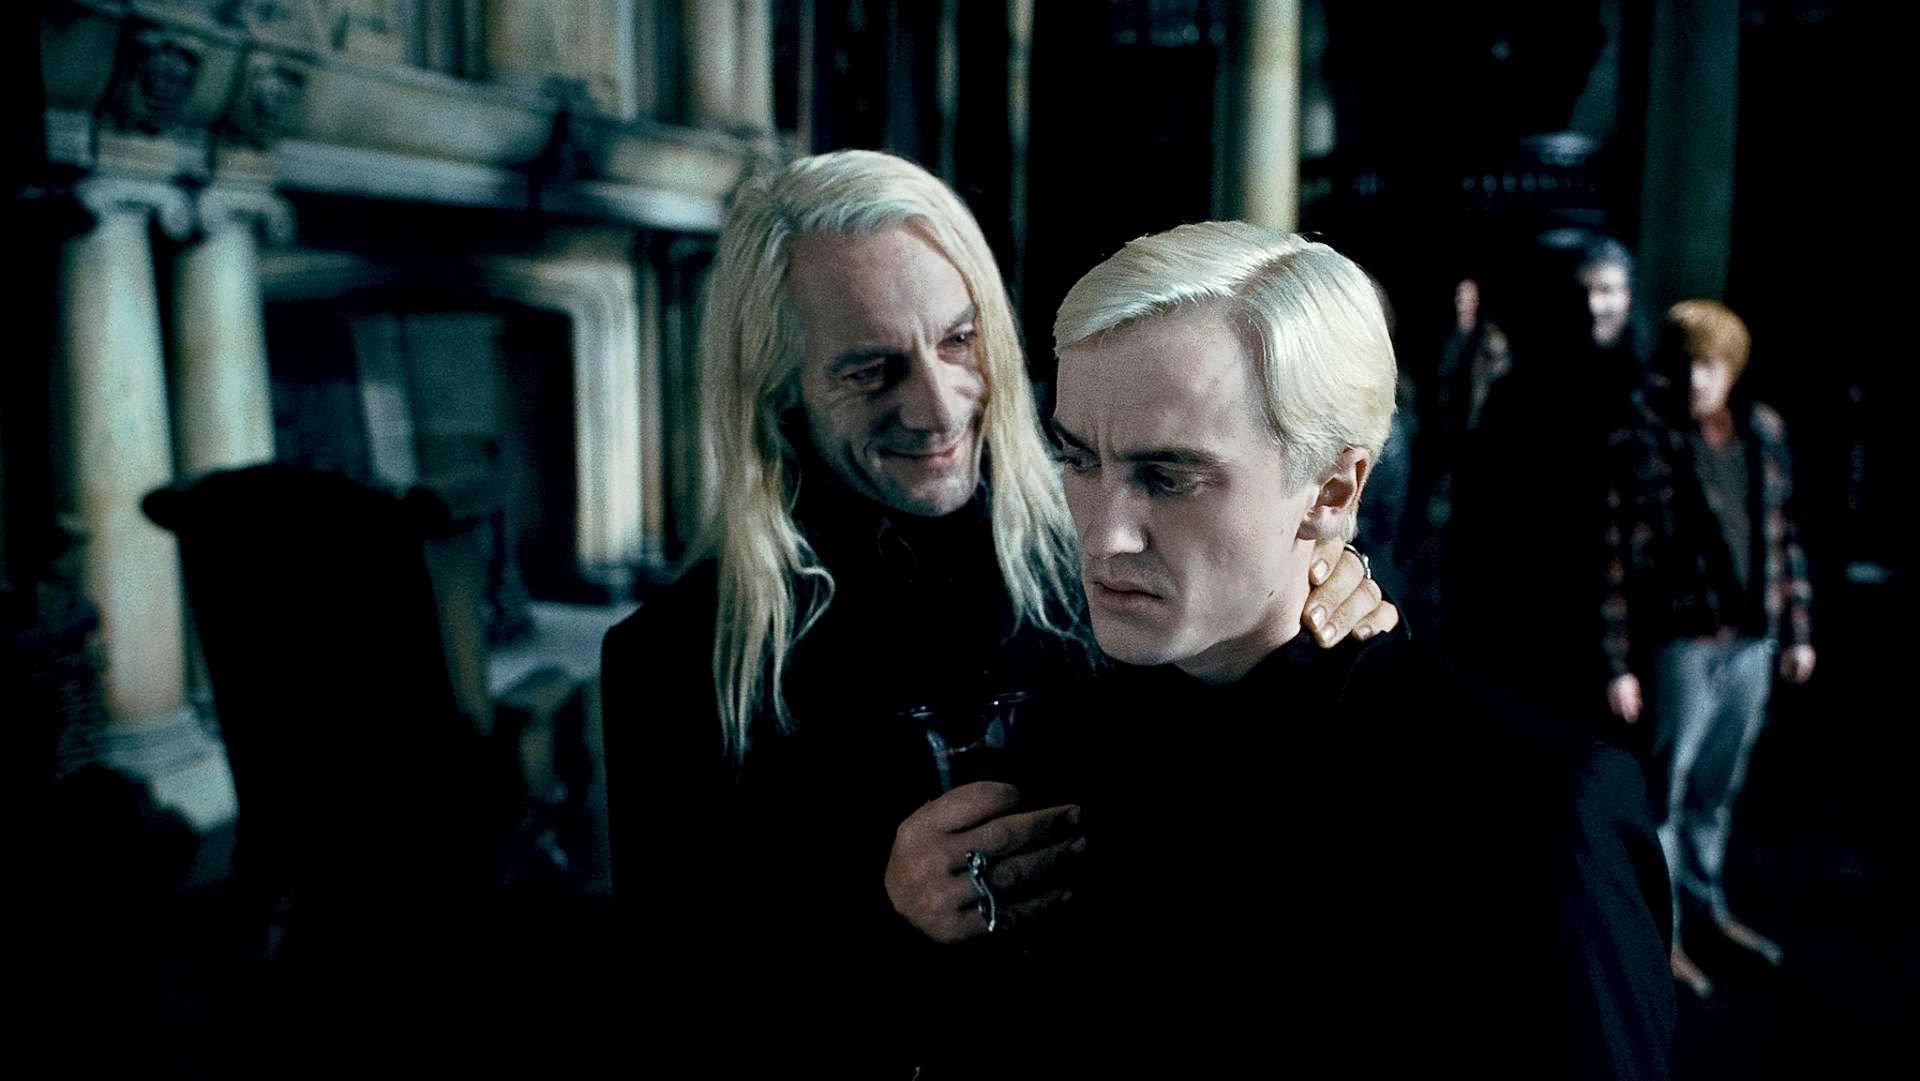 Tom Felton stars as Draco Malfoy and Jason Isaacs stars as Lucius Malfoy in Warner Bros. Pictures' Harry Potter and the Deathly Hallows: Part I (2010)